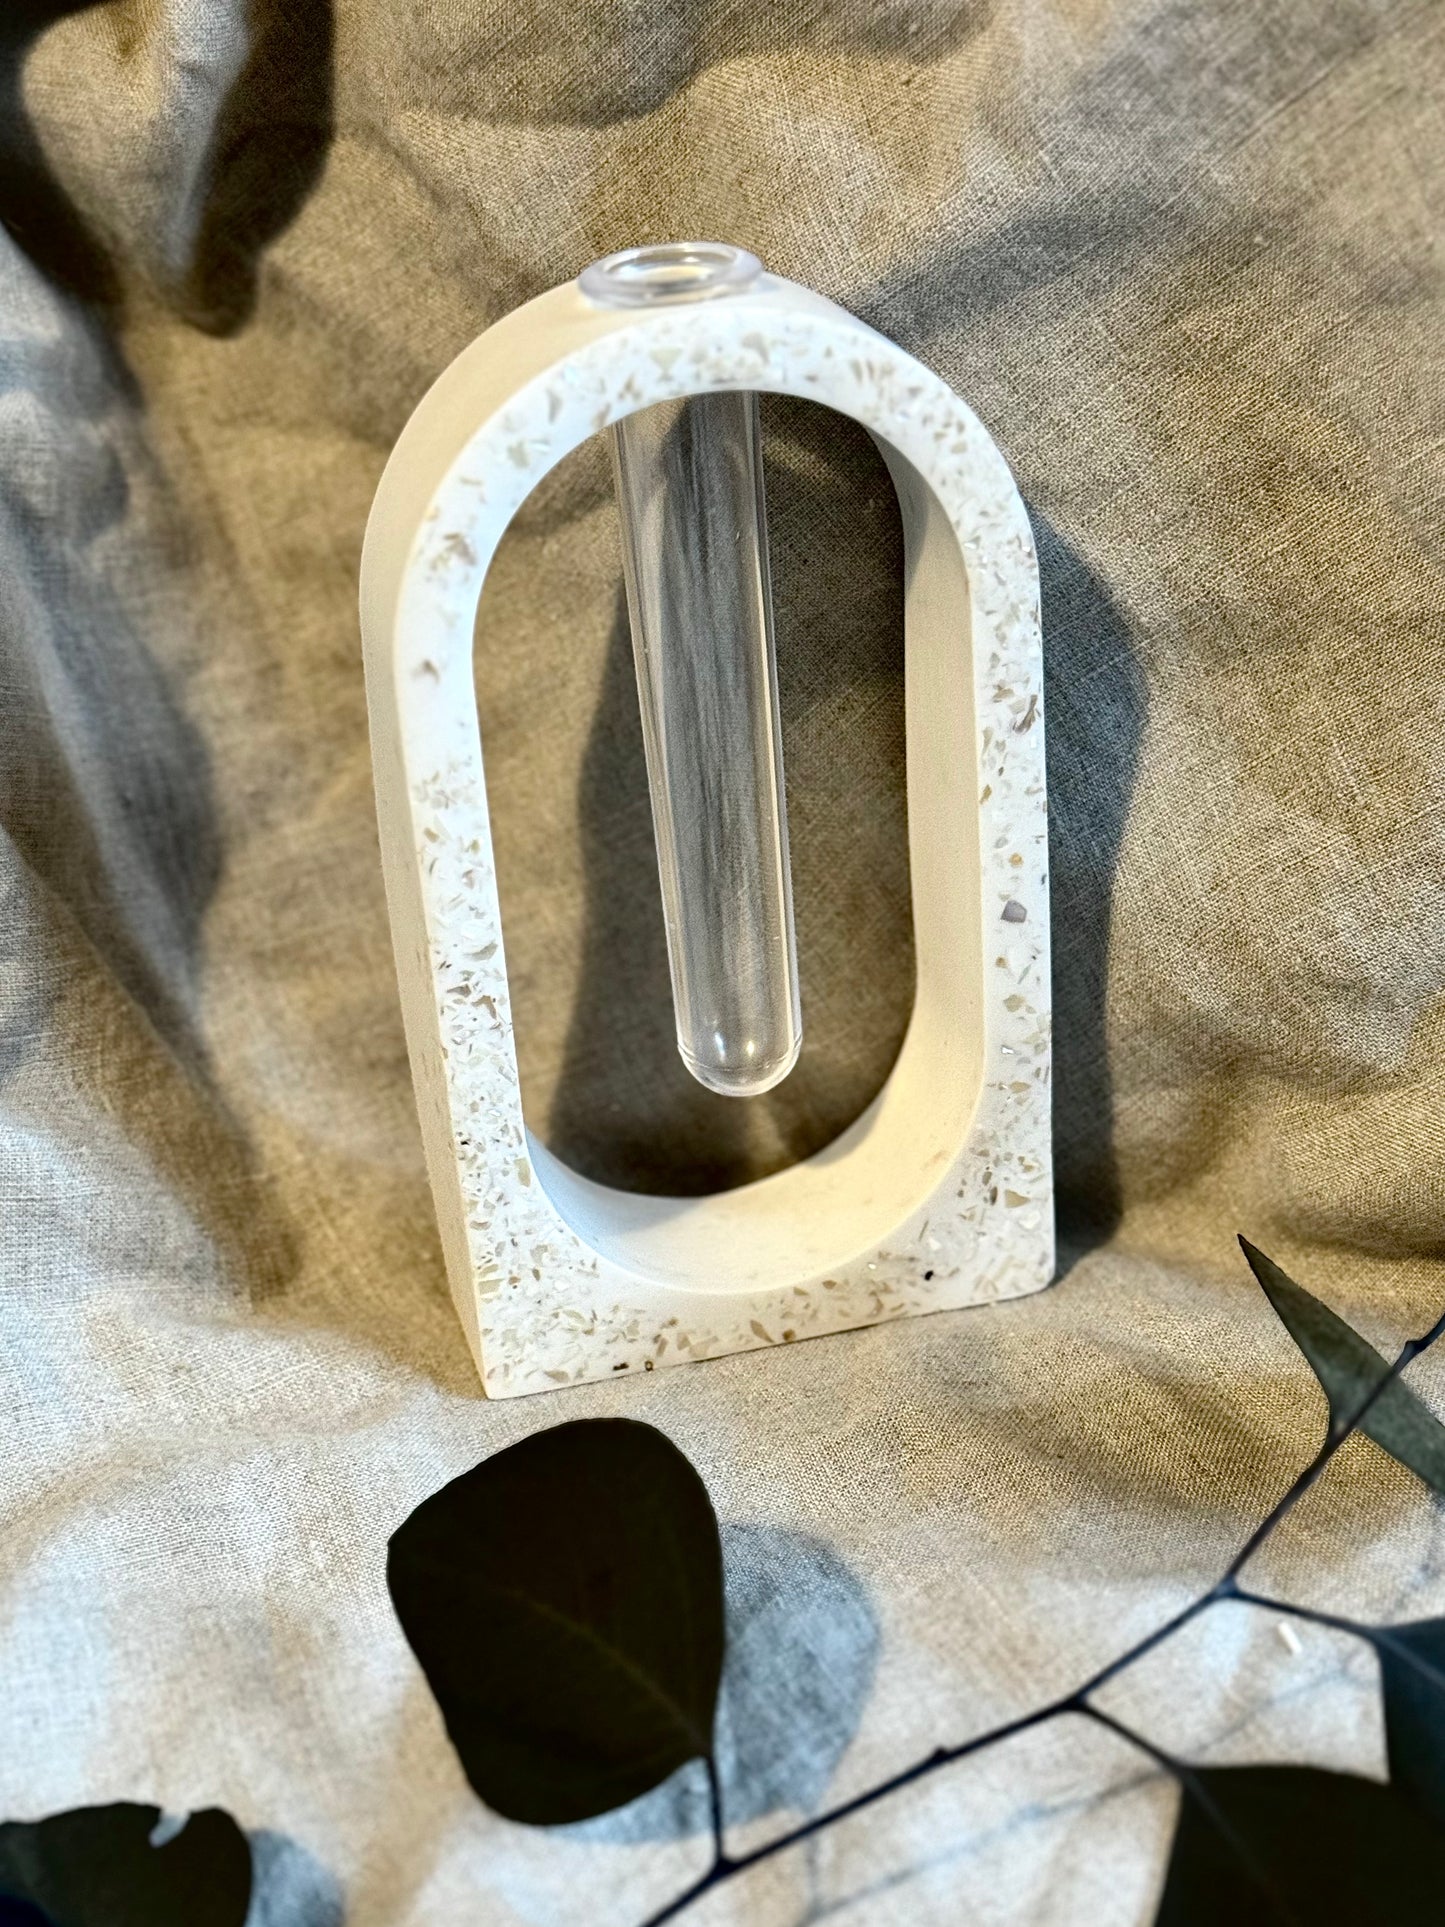 Mother of Pearl propagation vase